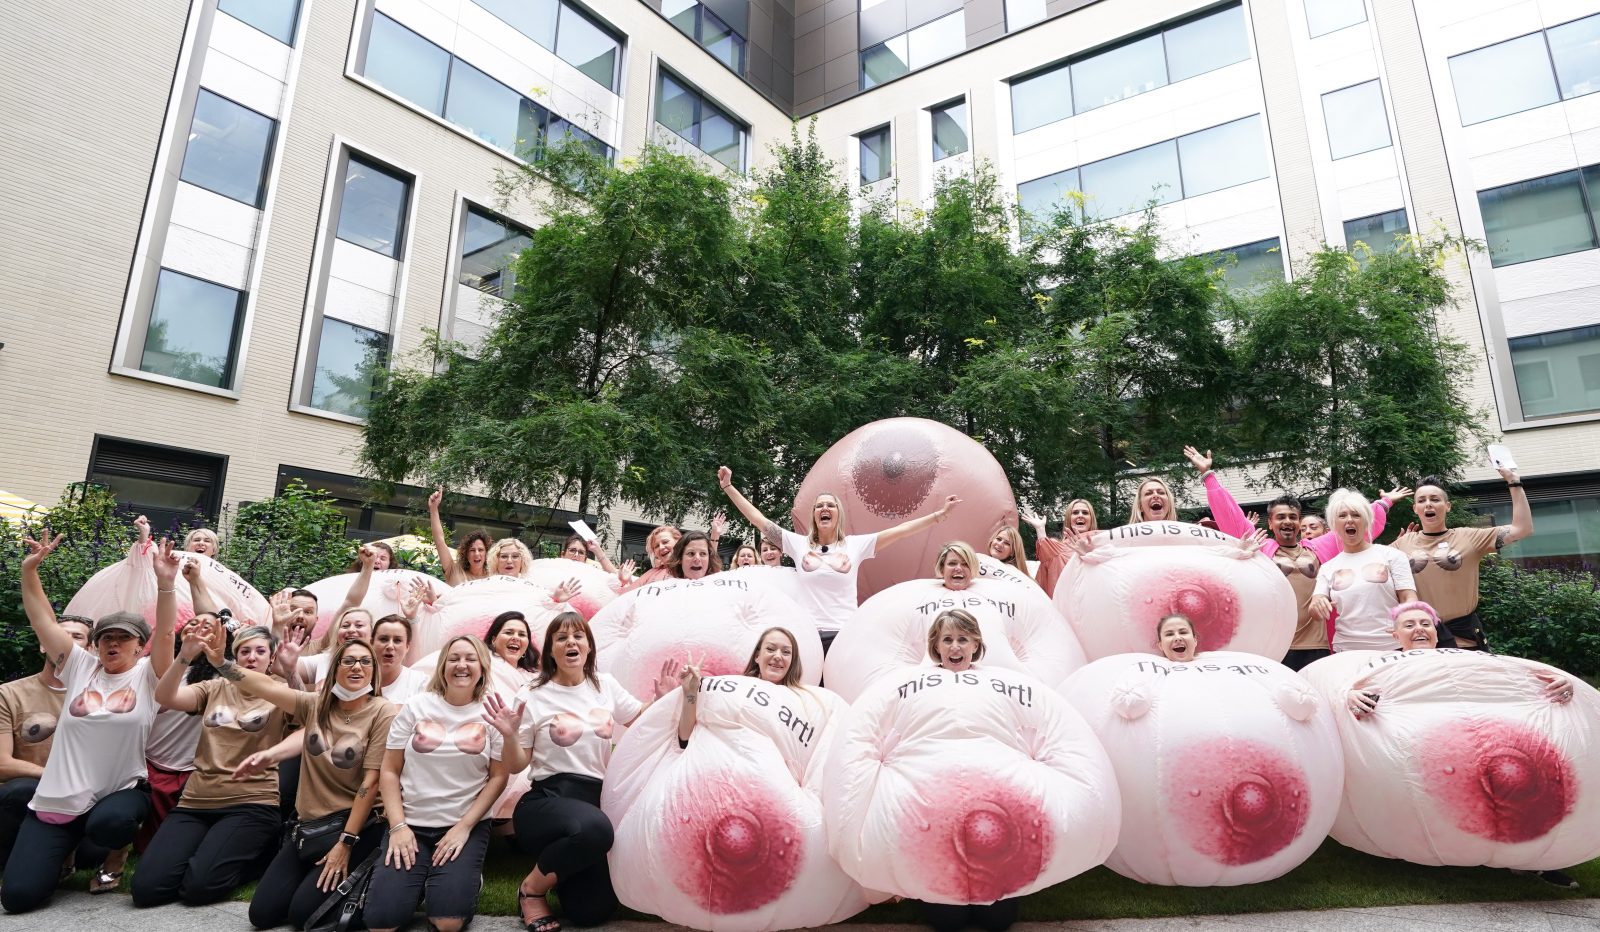 Giant inflatable boobs are popping up over London to encourage us